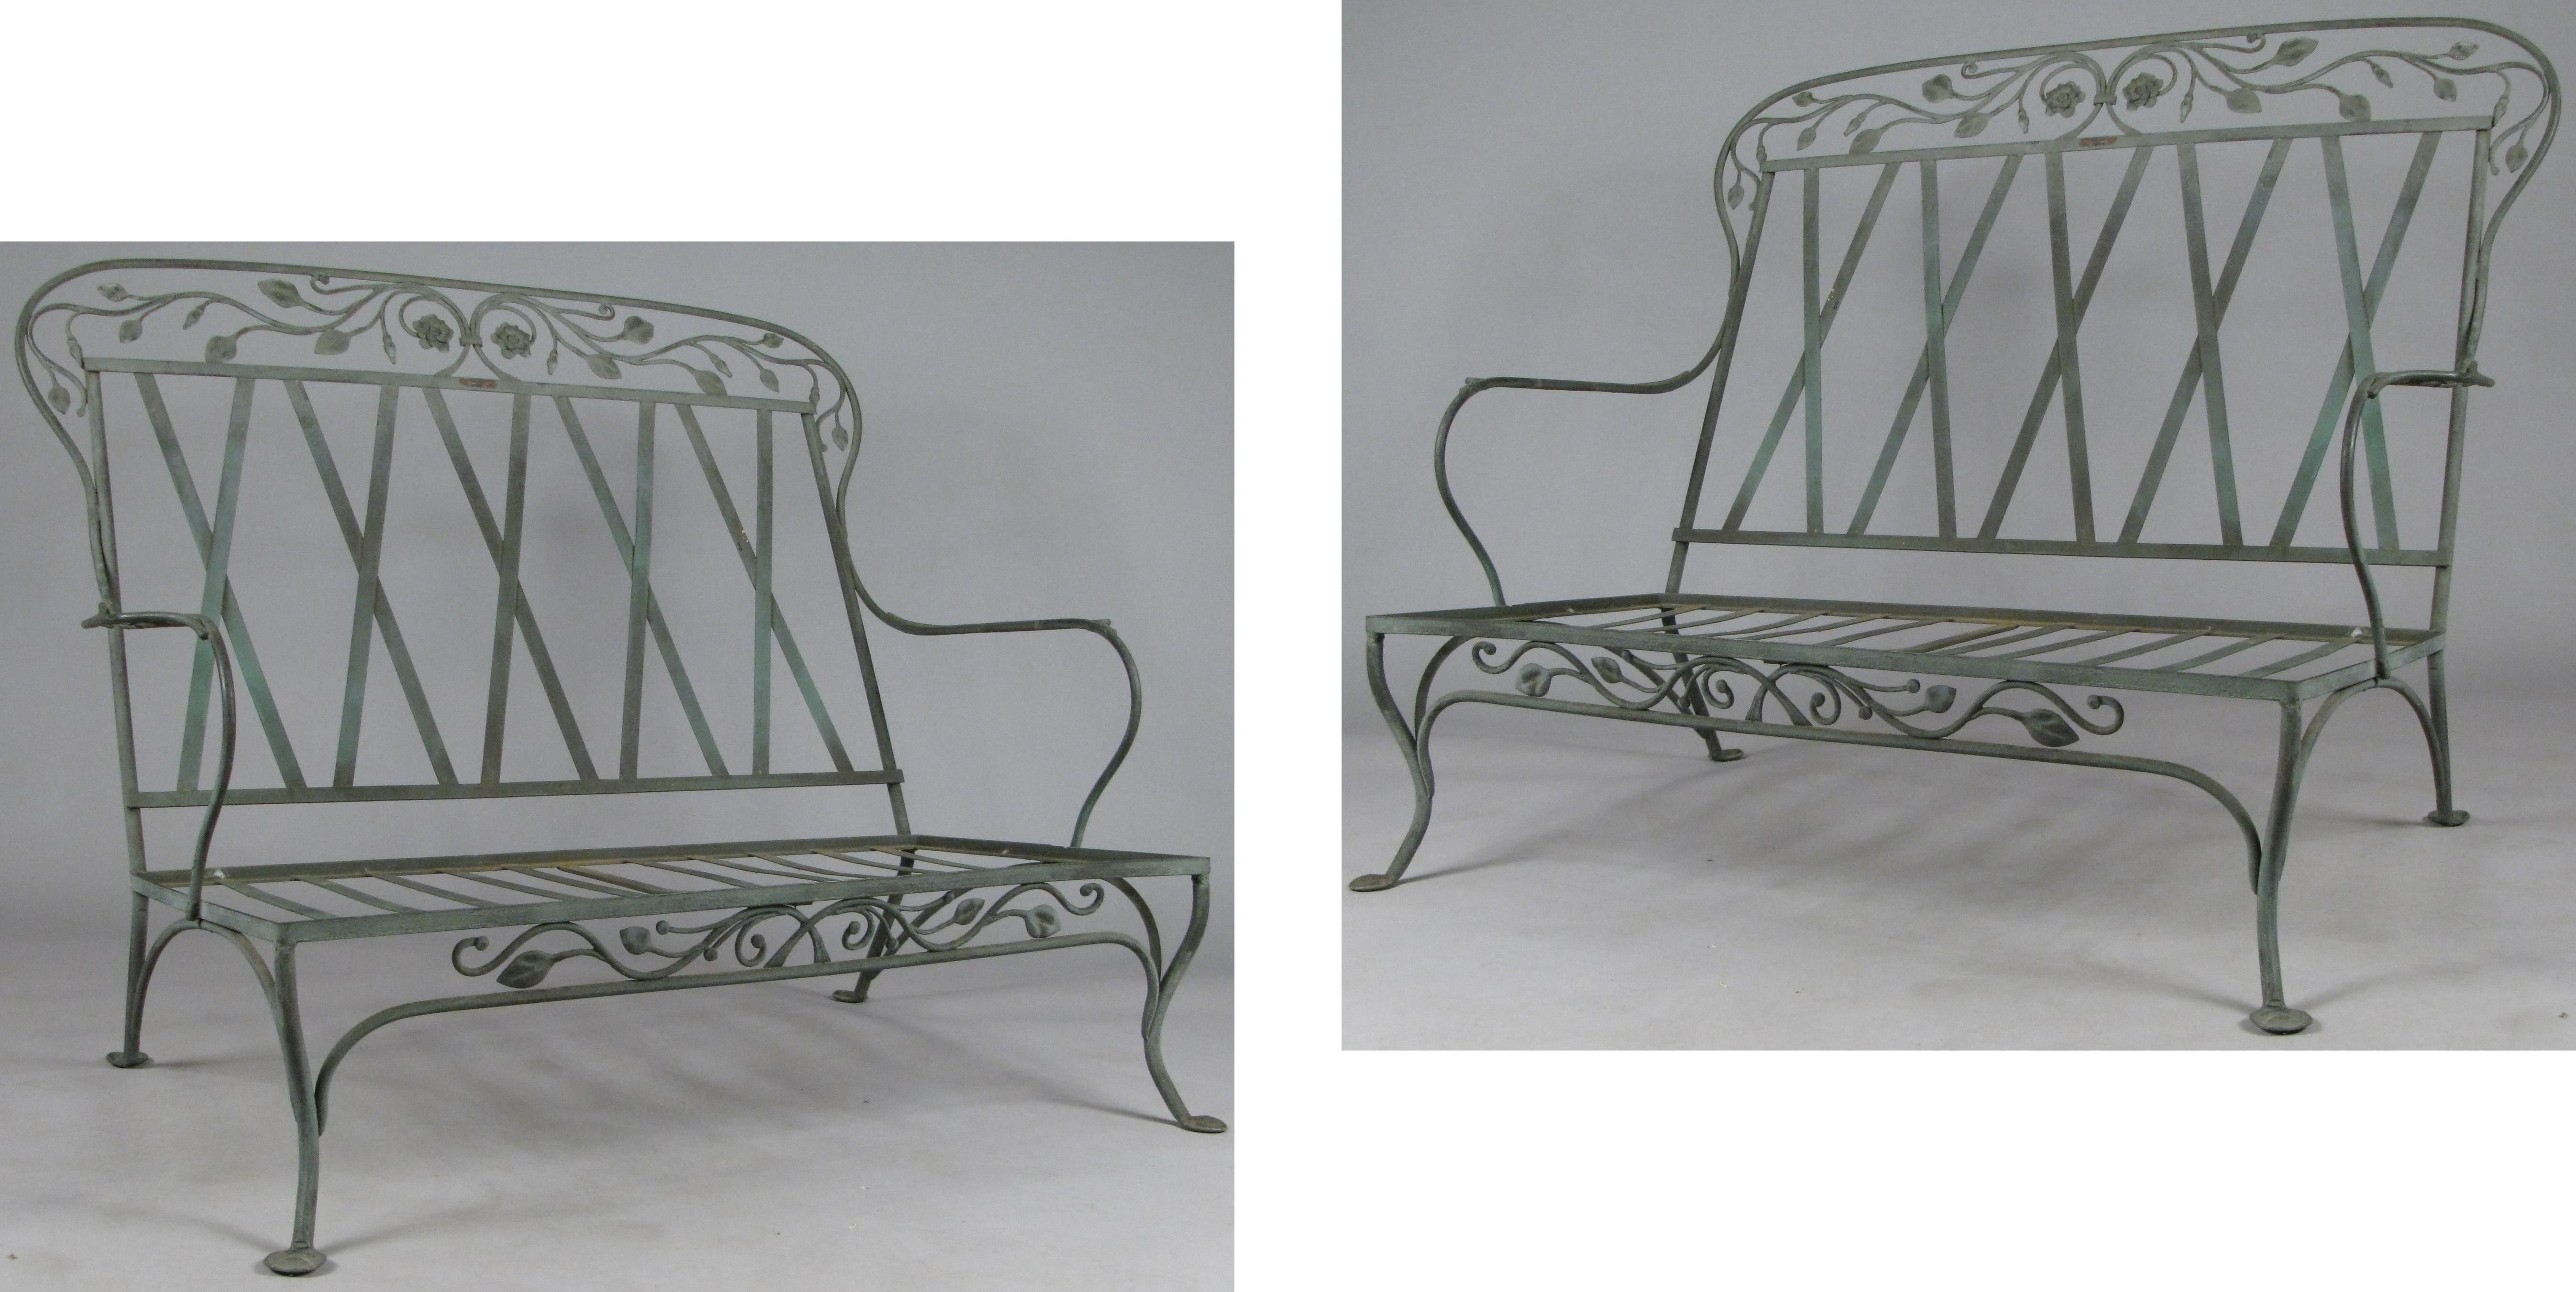 A gorgeous pair of large wrought iron settees circa 1950, by Salterini, in their blooming rose pattern. beautiful scale and details, with vine and flower details under the seat and in a large frieze above the back. wonderful aged patina. 

We also